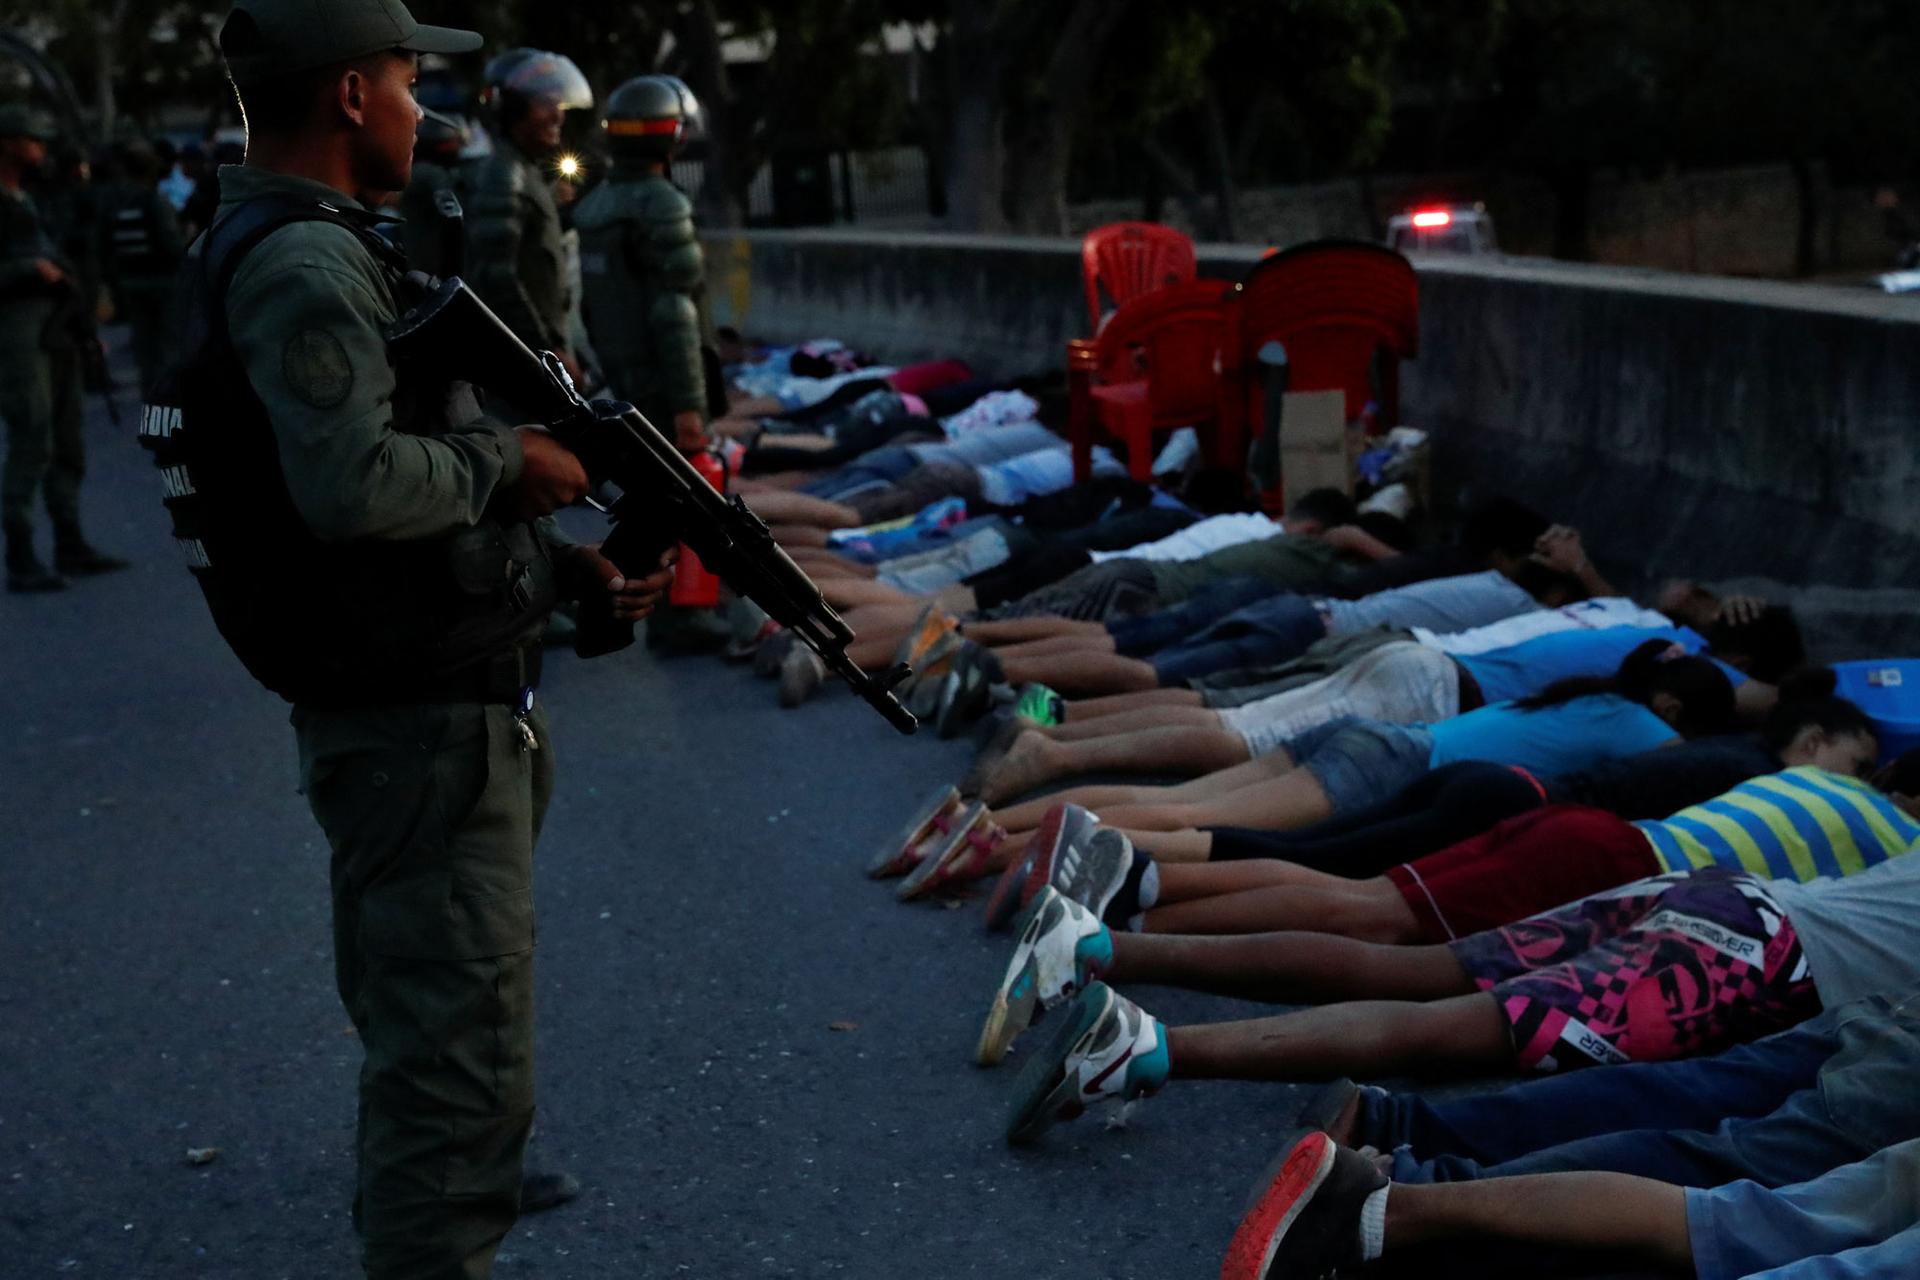 A security force member stands holding a rifle next to detainees laying on the street, face down.